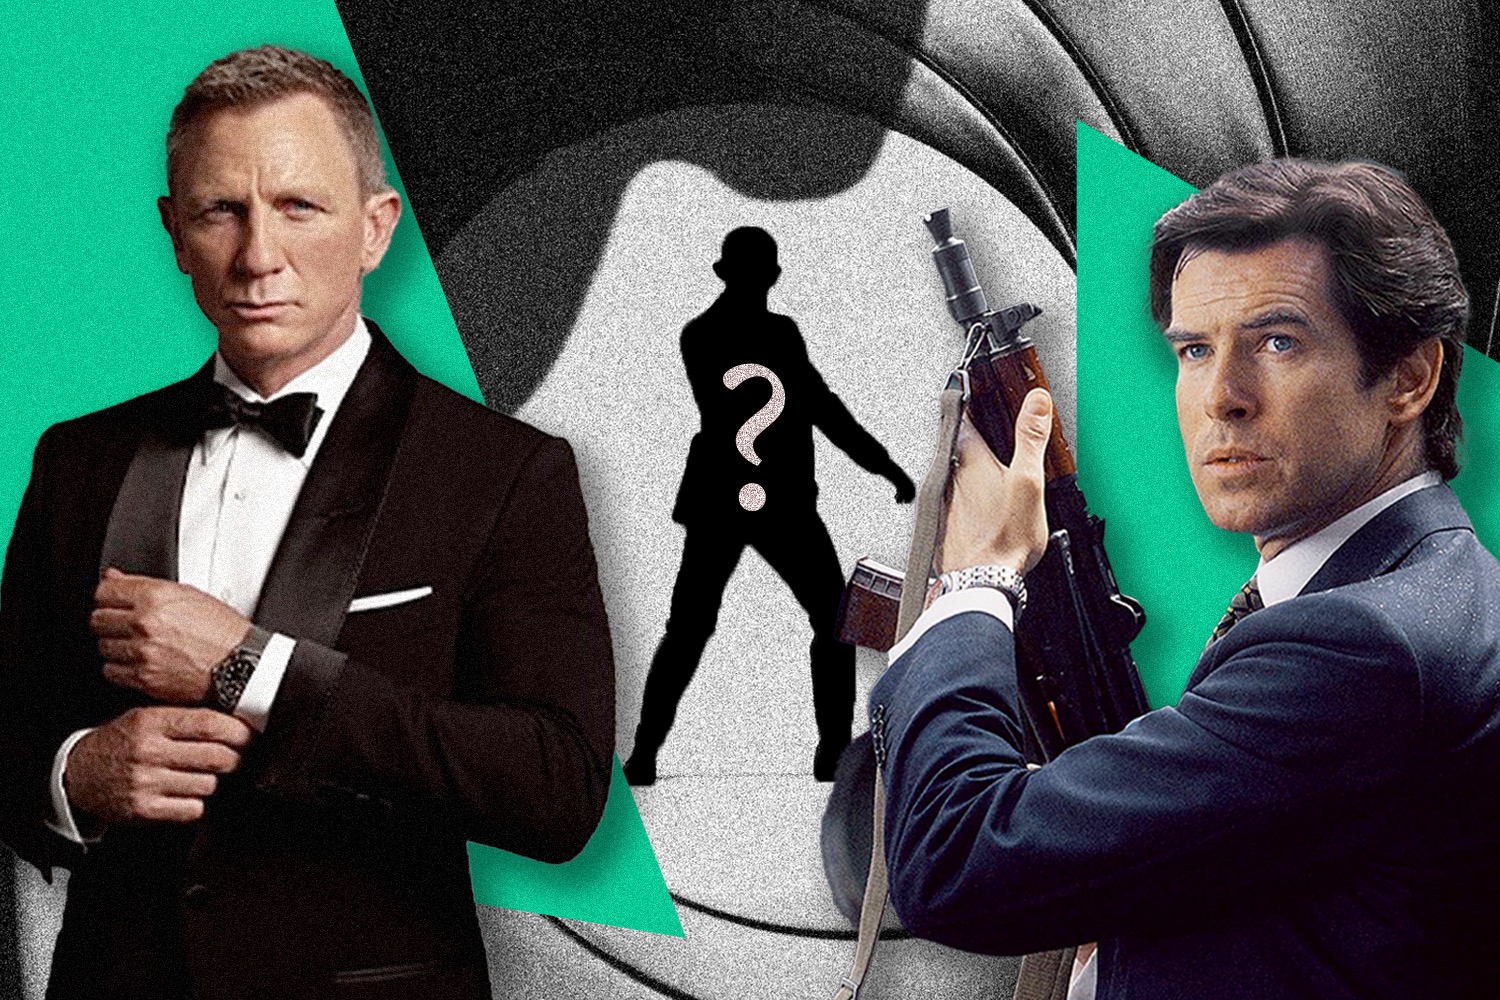 James Bond Producers Make Disappointing Announcement About The Next 007